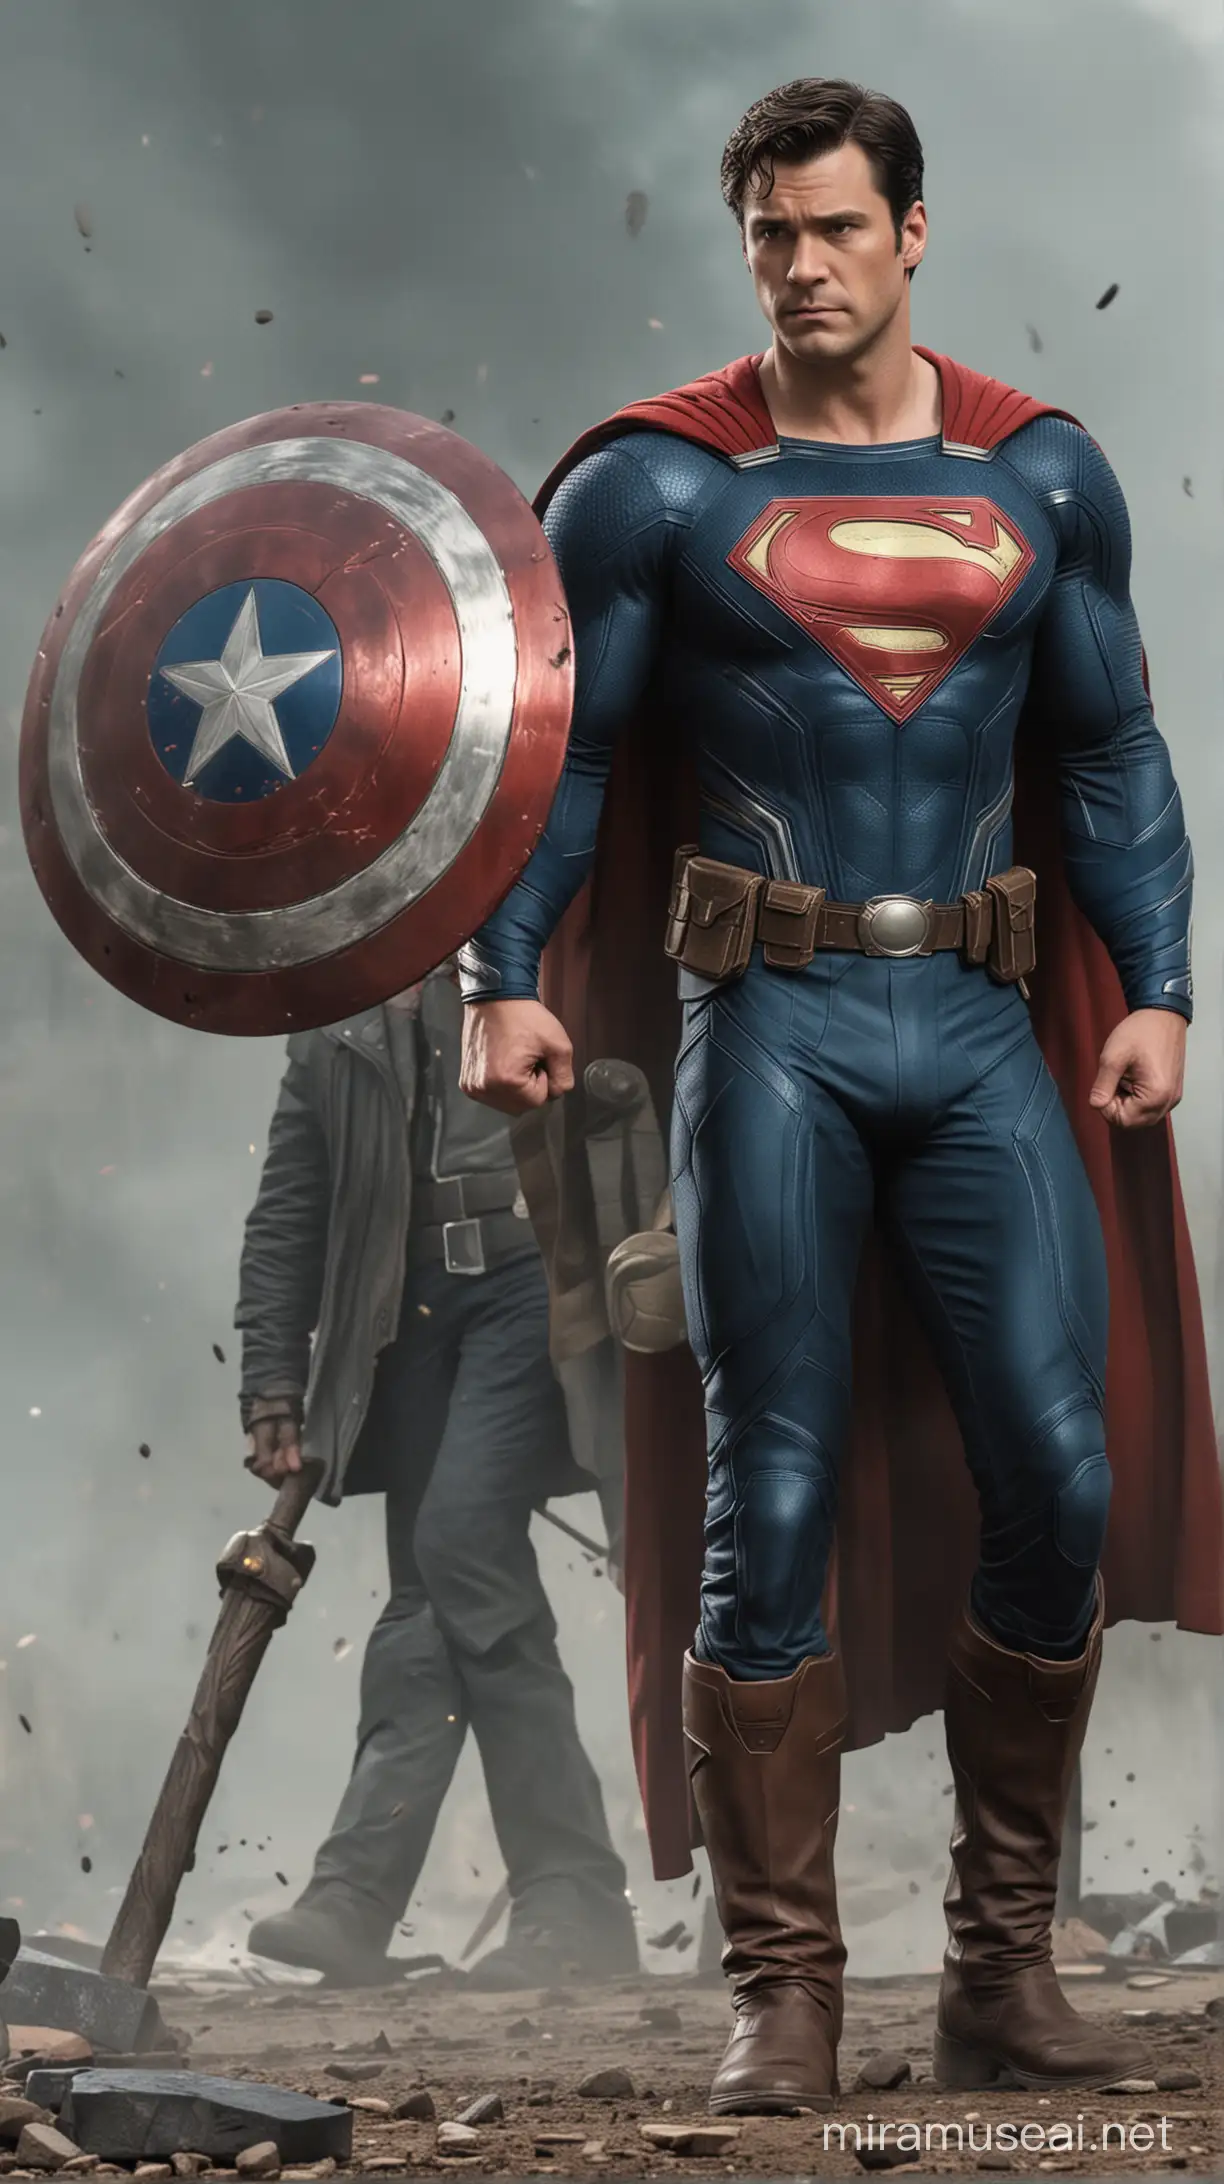 Superman with Captain Americas Shield and Thors Hammer